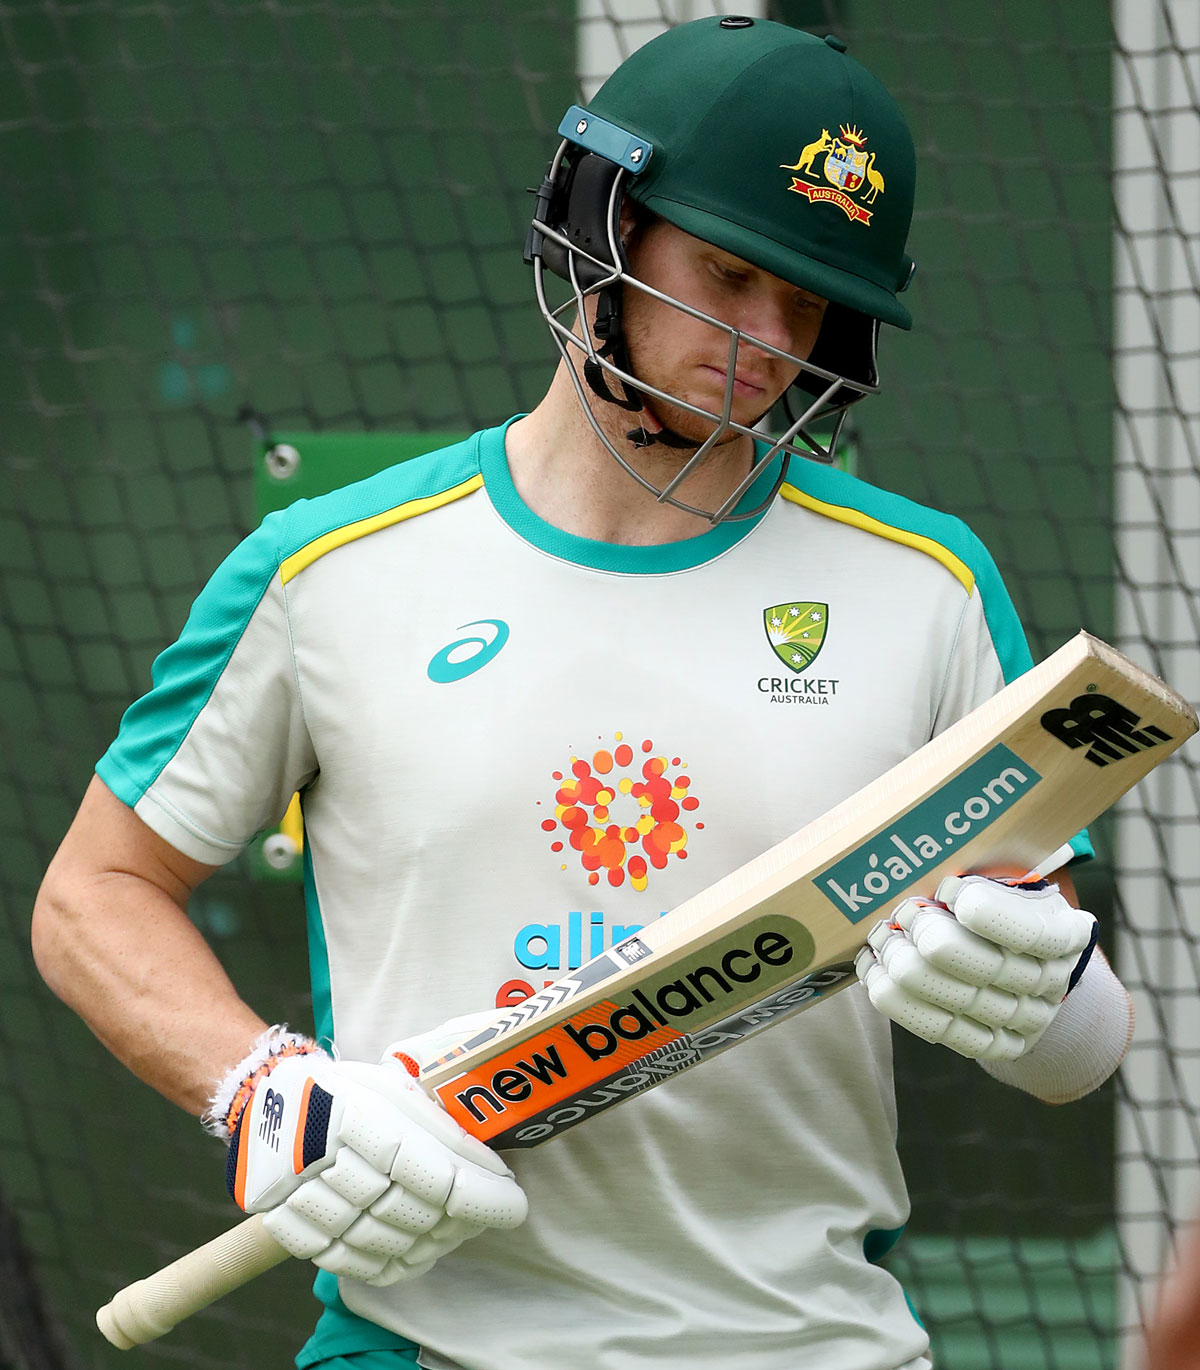 Australia would like to play at the Gabba, says Smith